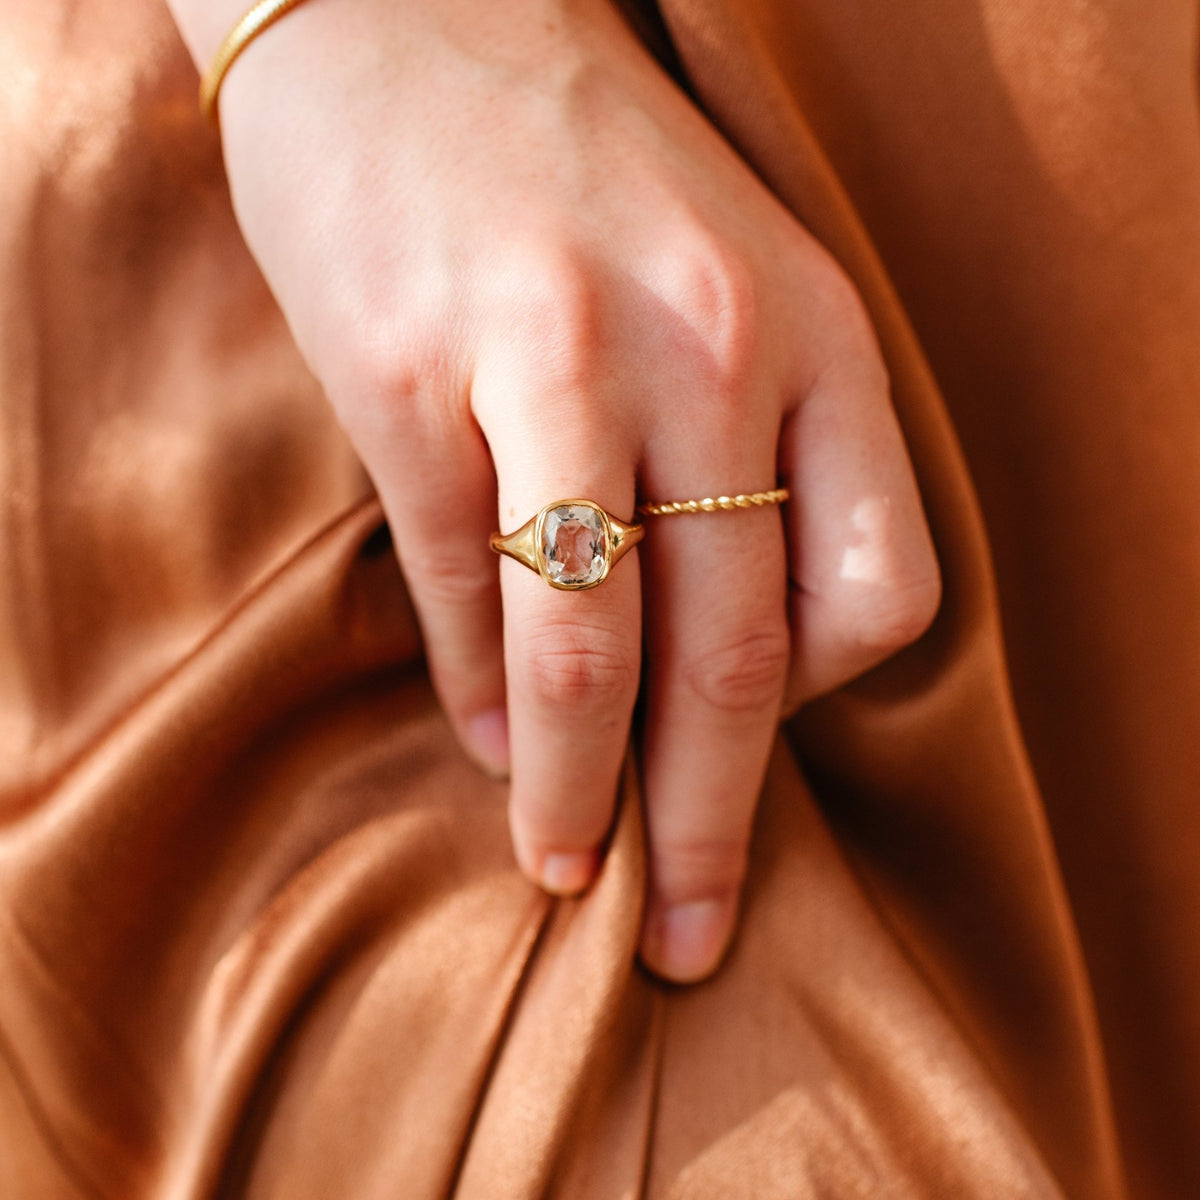 LOVE VINTAGE SIGNET RING - GOLD - SO PRETTY CARA COTTER